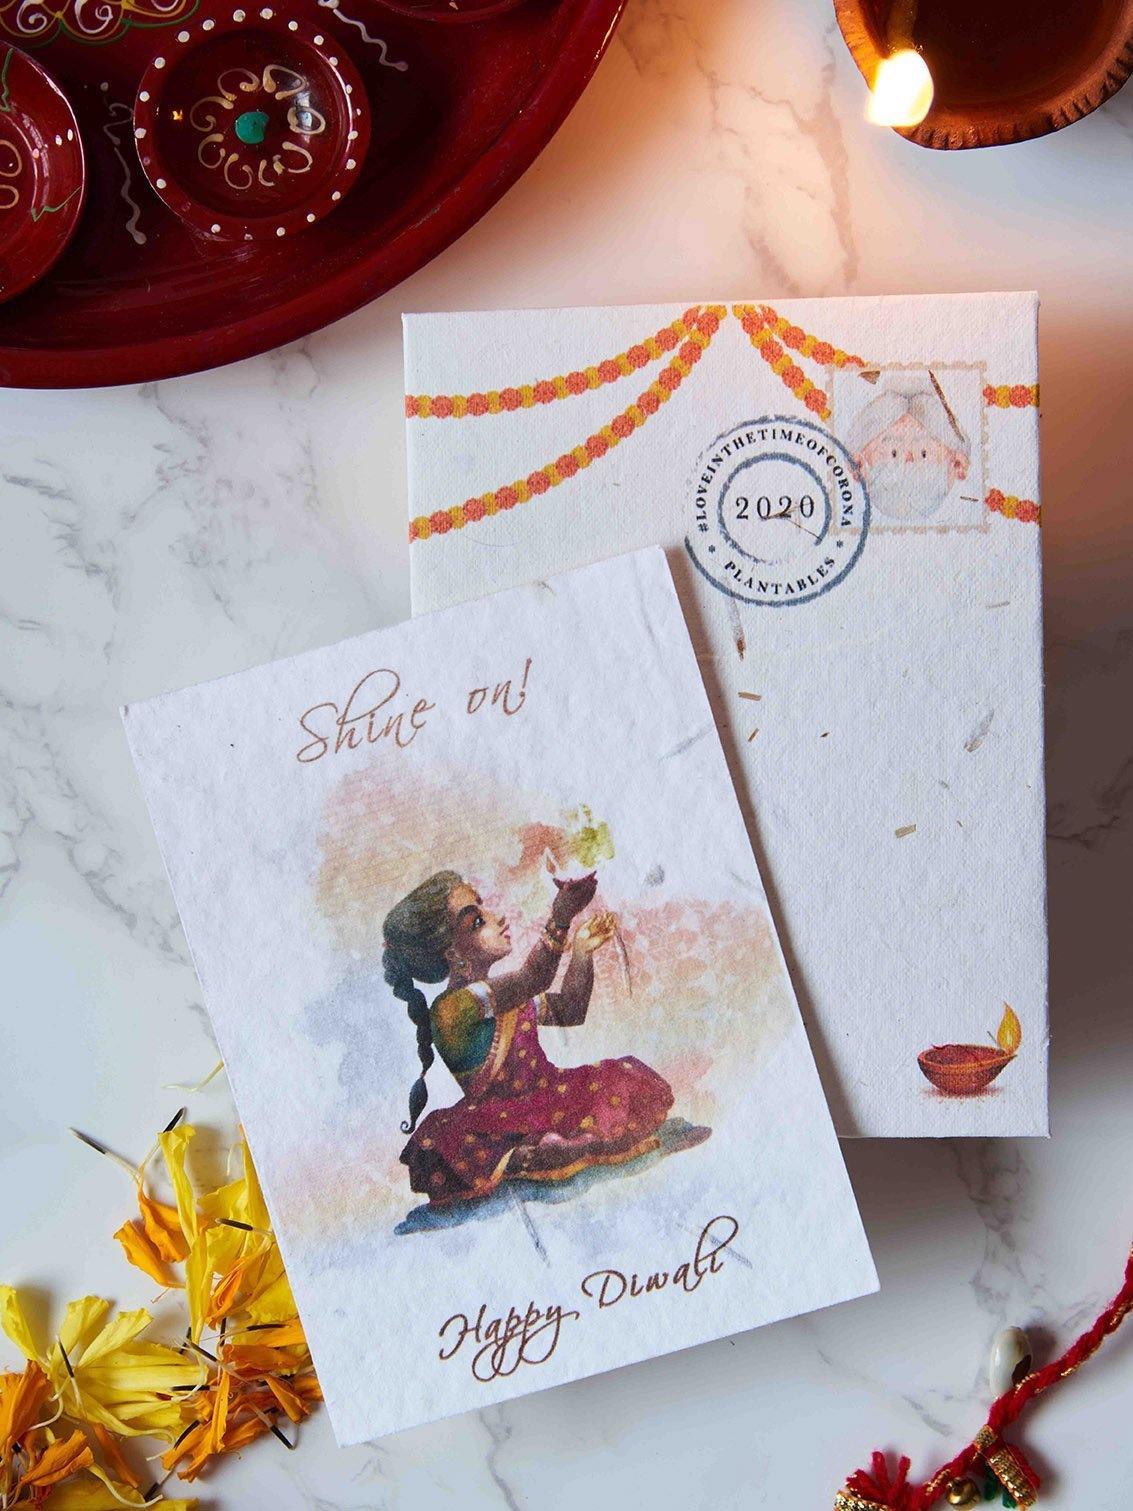 Diwali greeting with a beautiful illustration of hope and positivity